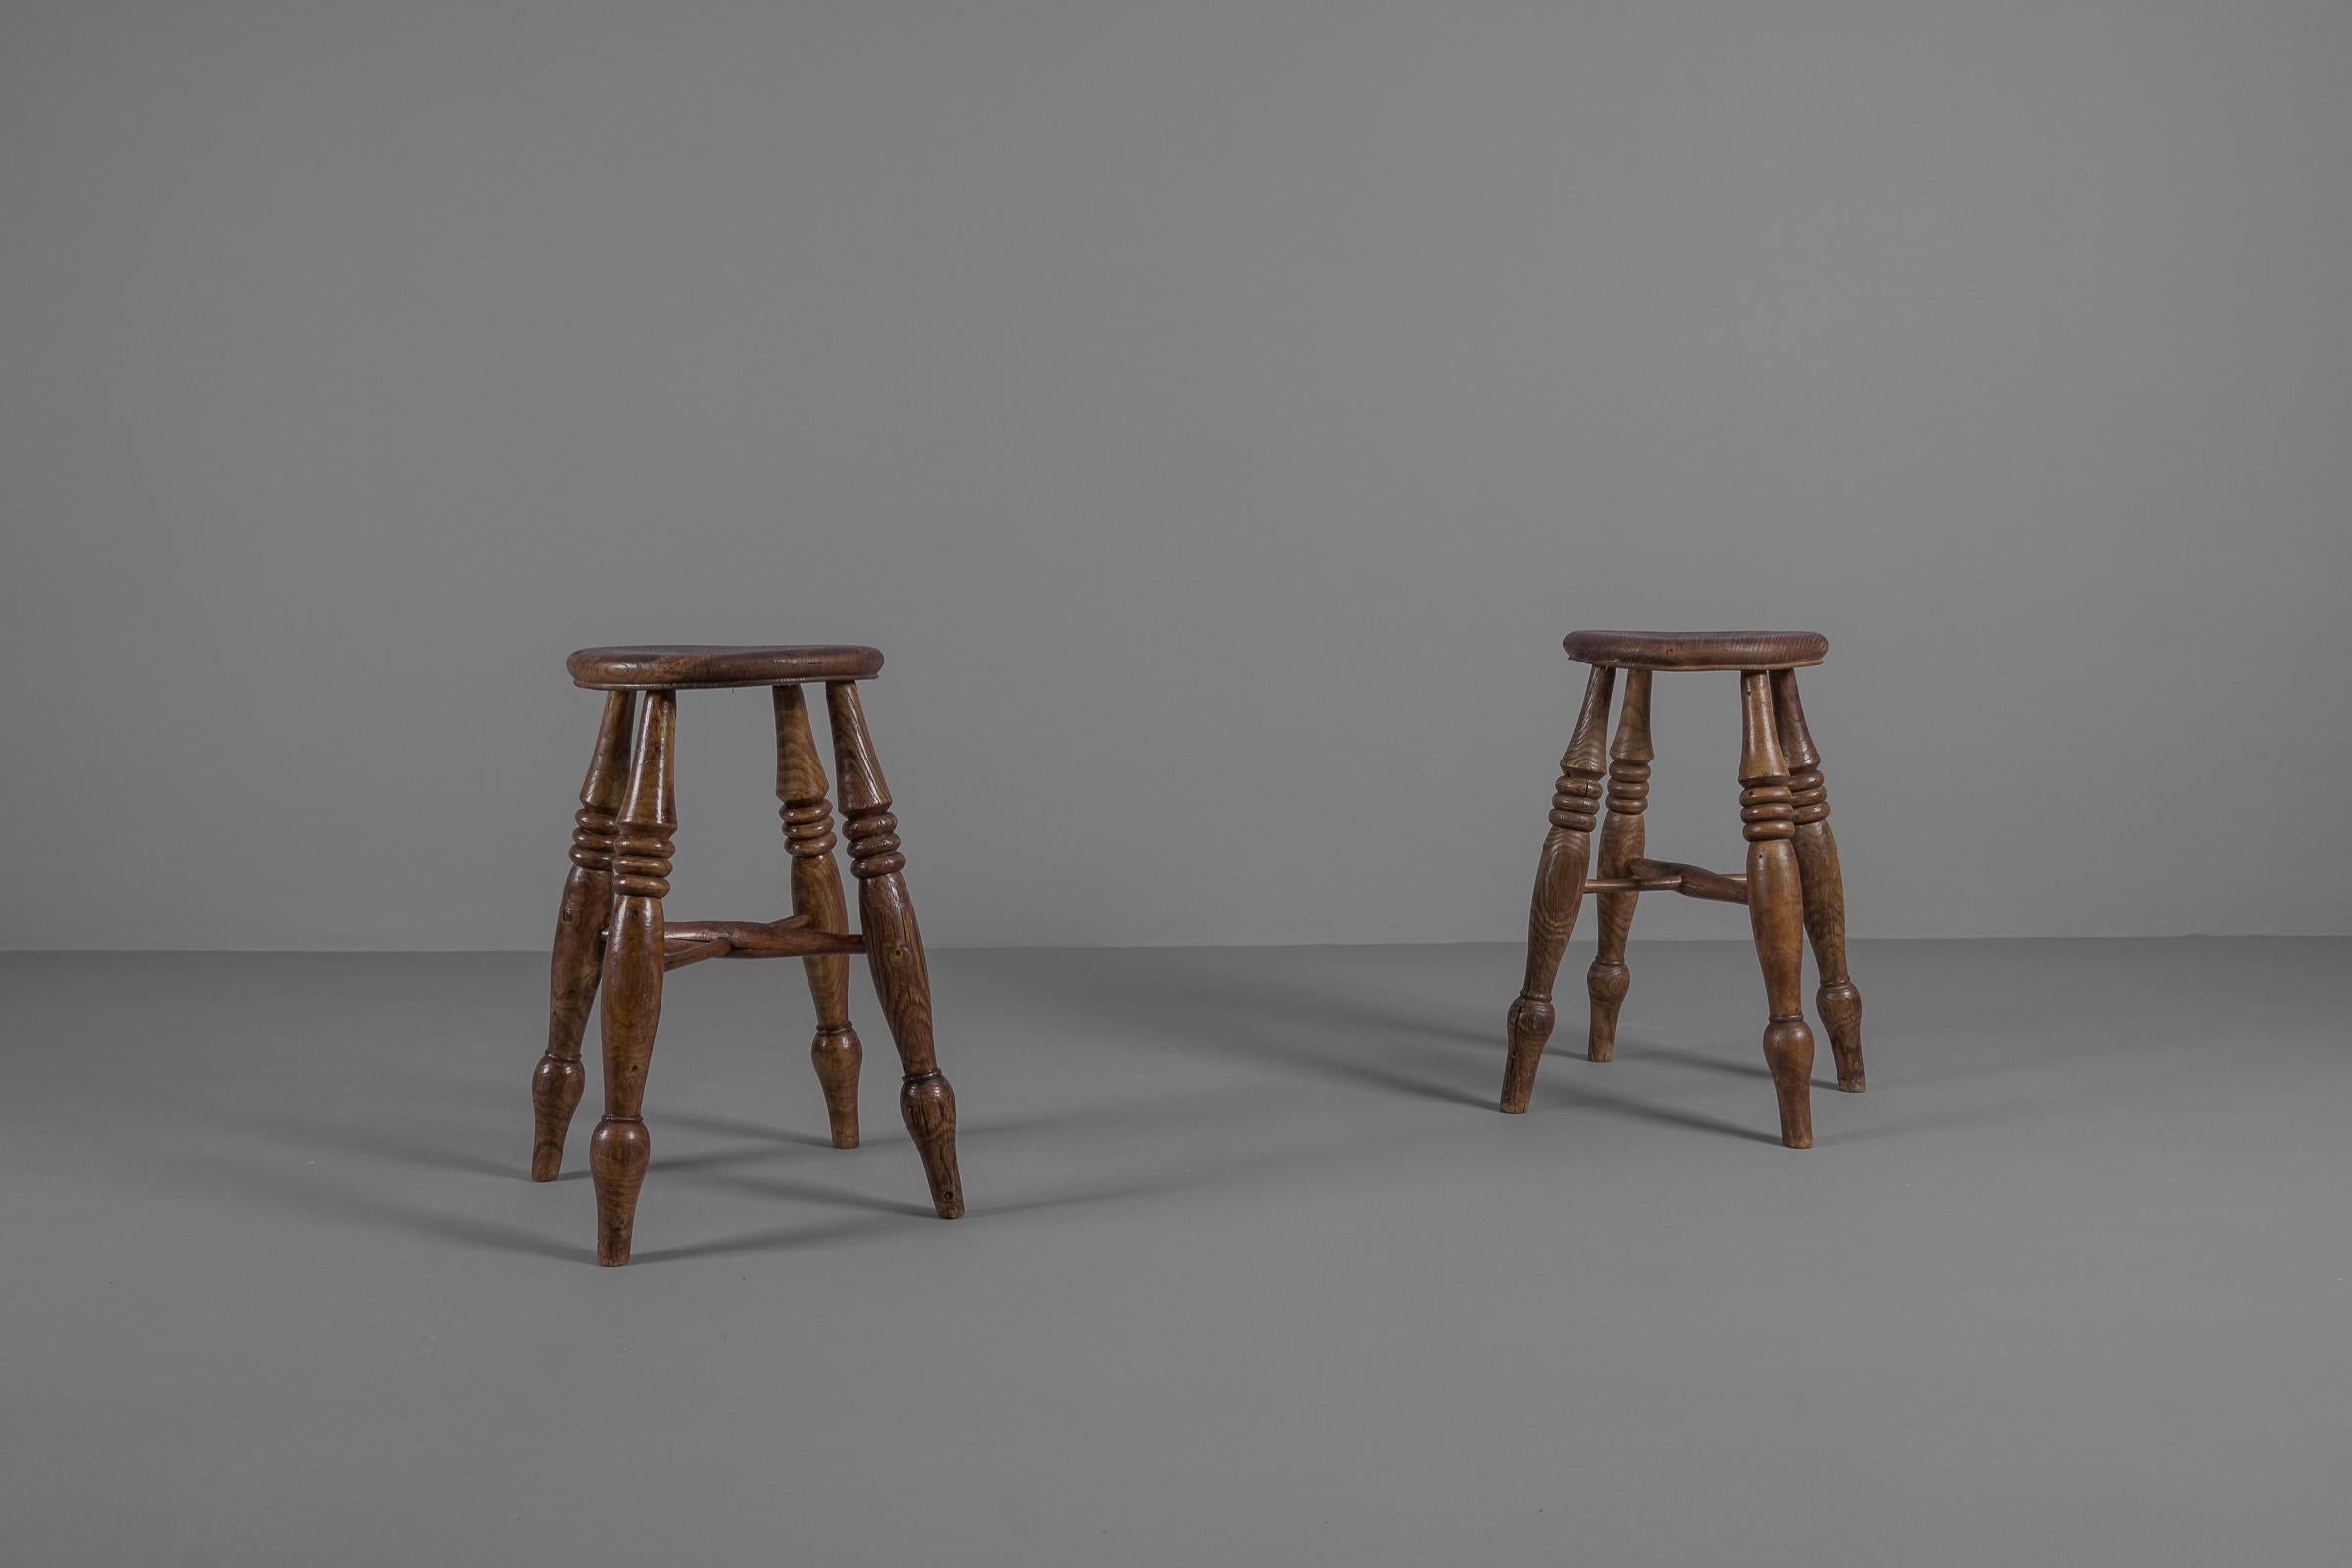 French Provincial Pair of Lovely Old Wooden Stools, 1950s France